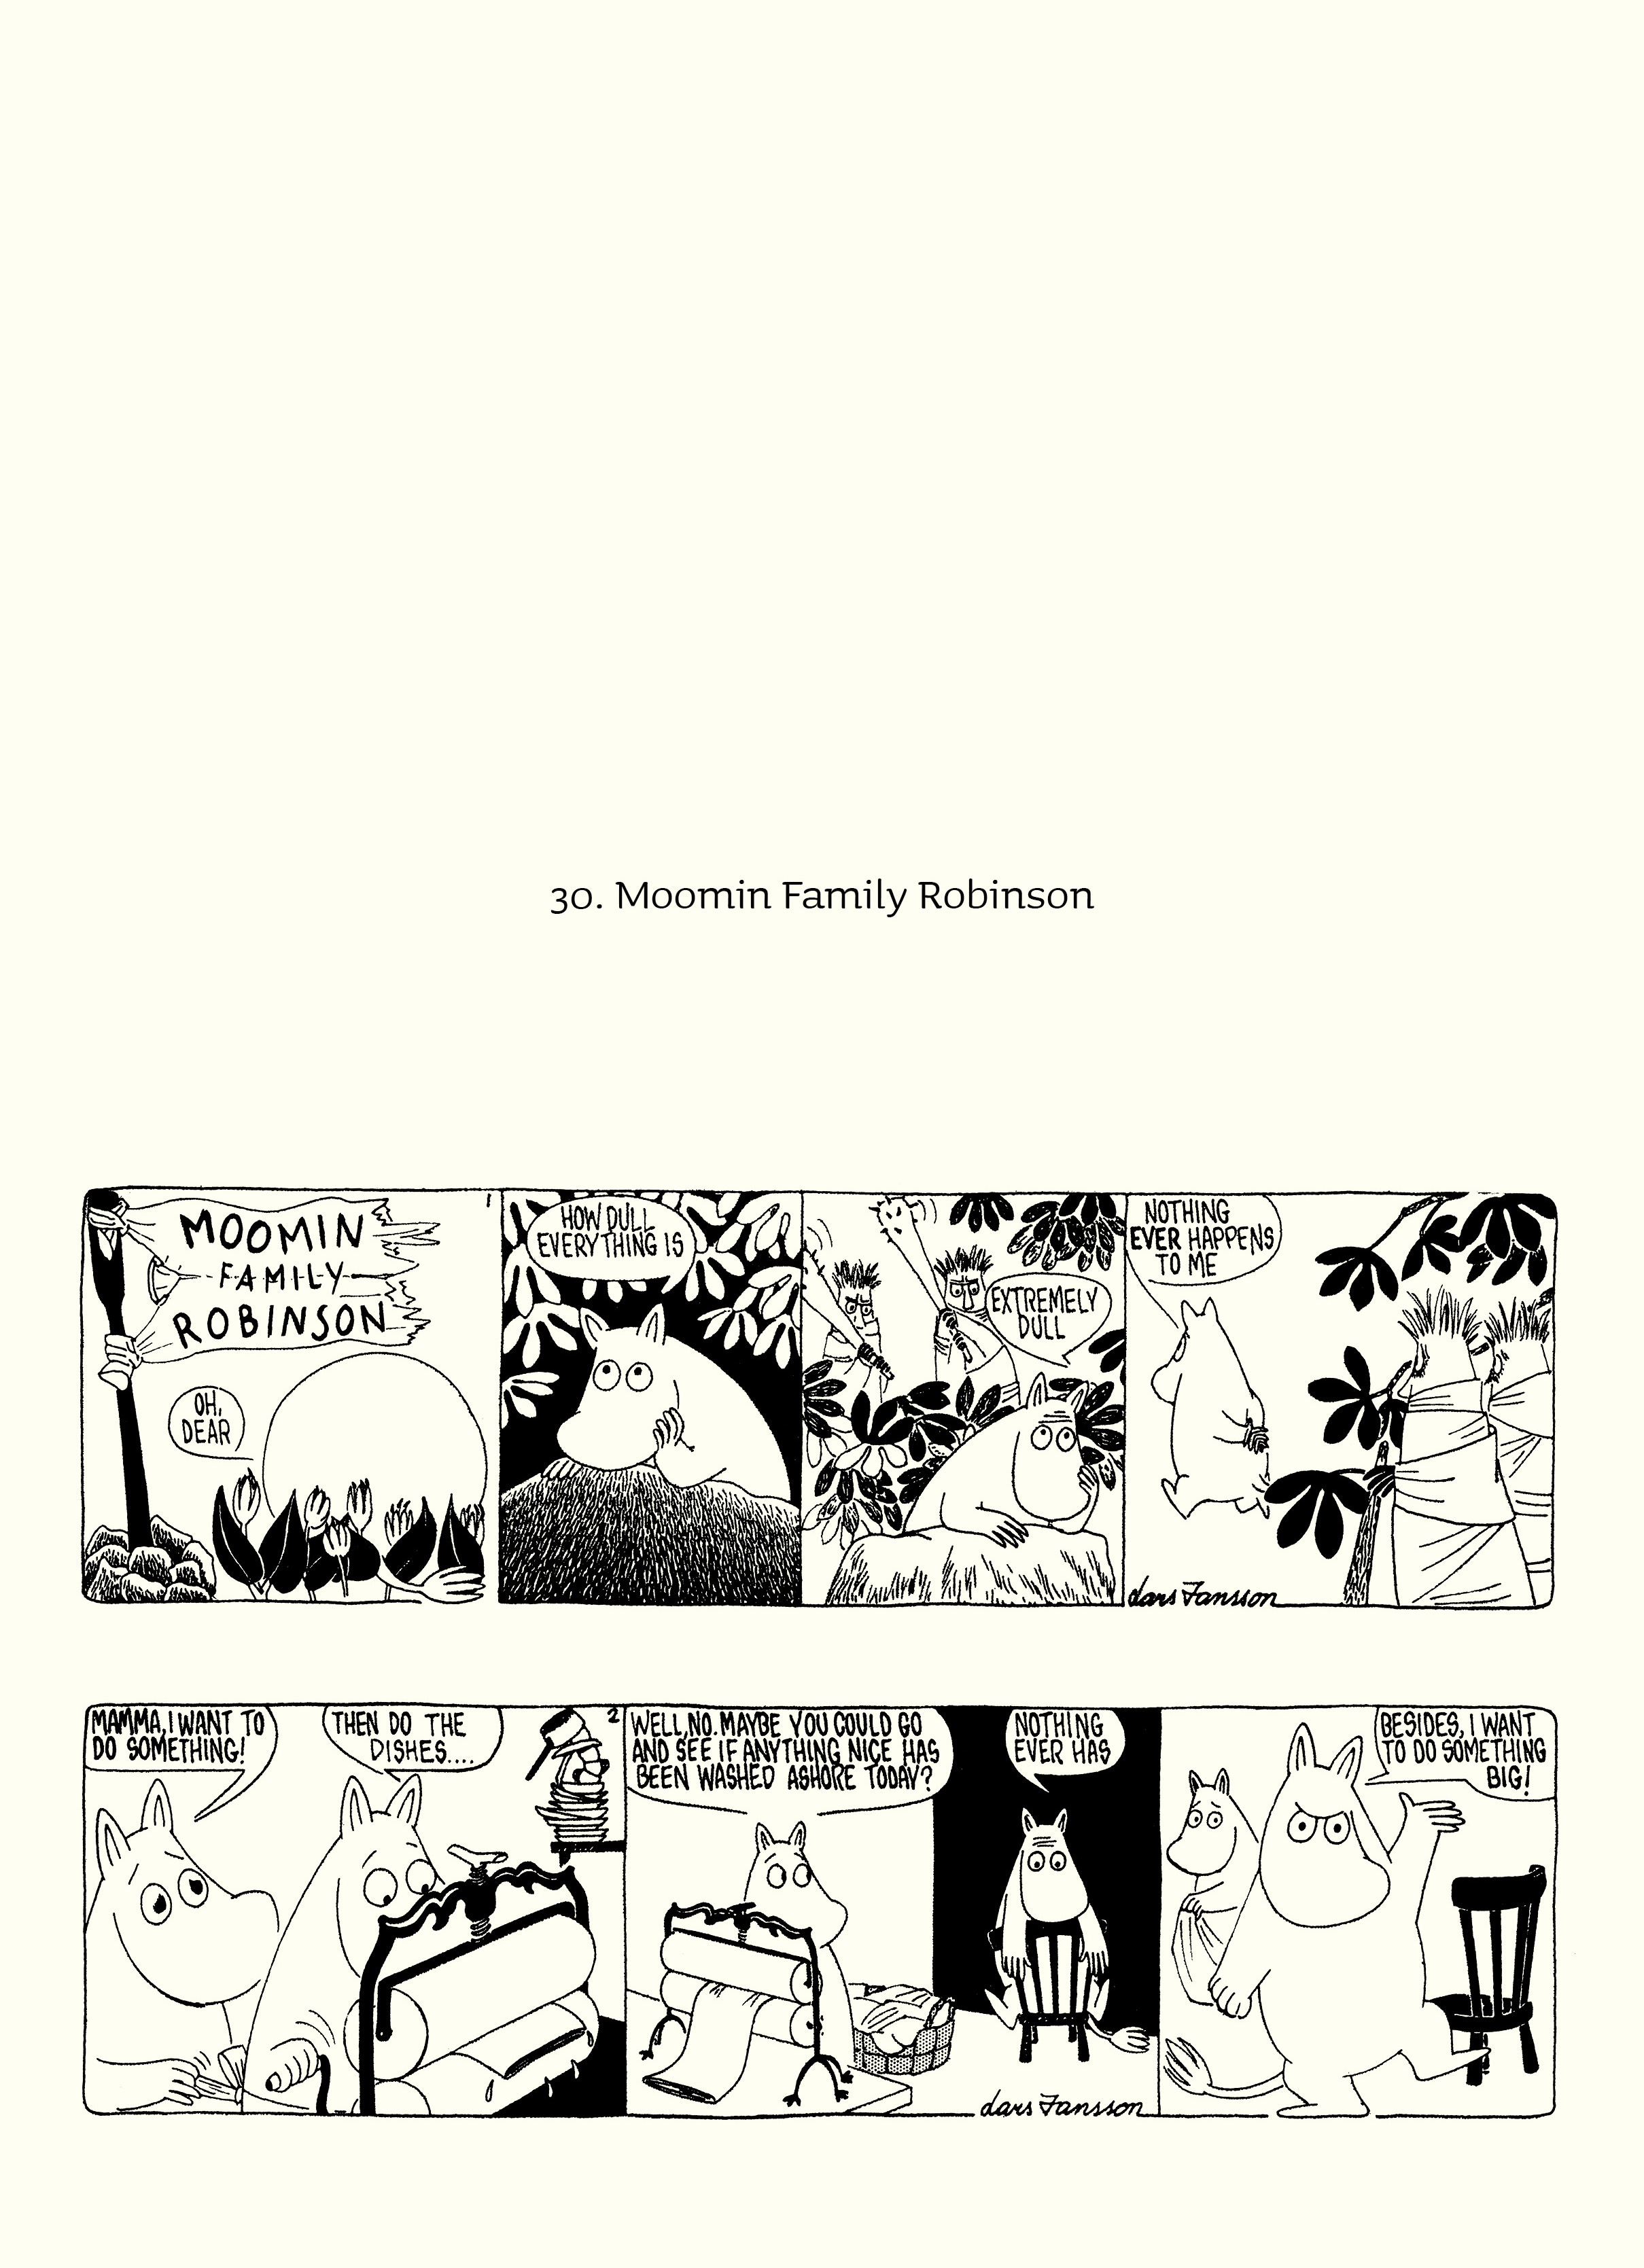 Read online Moomin: The Complete Lars Jansson Comic Strip comic -  Issue # TPB 8 - 5